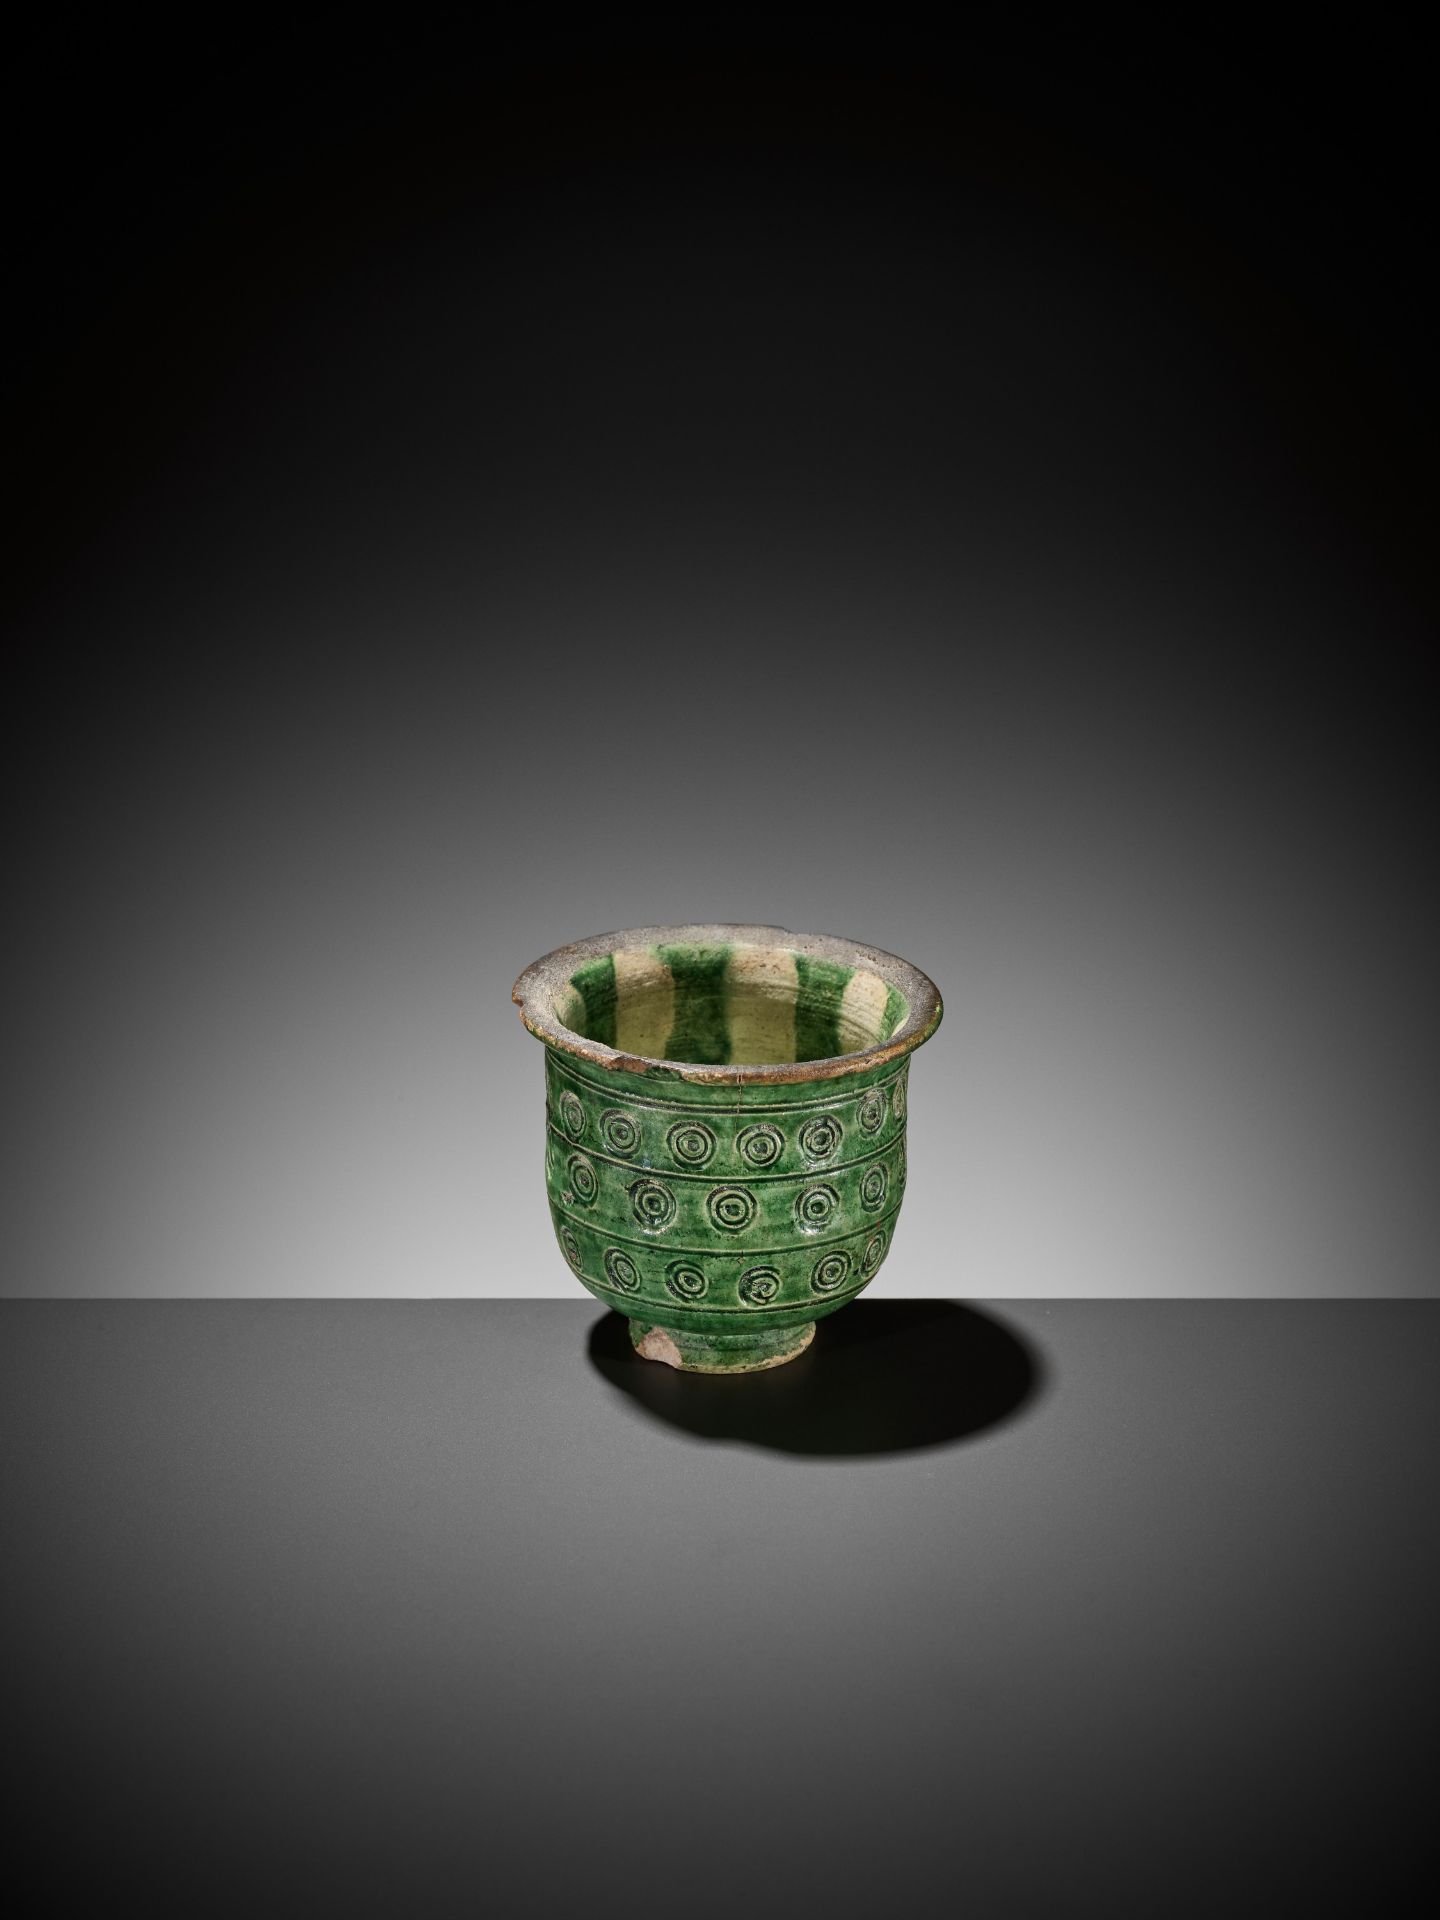 A RARE GREEN-GLAZED BELL-SHAPED CUP, TANG DYNASTY - Image 3 of 8